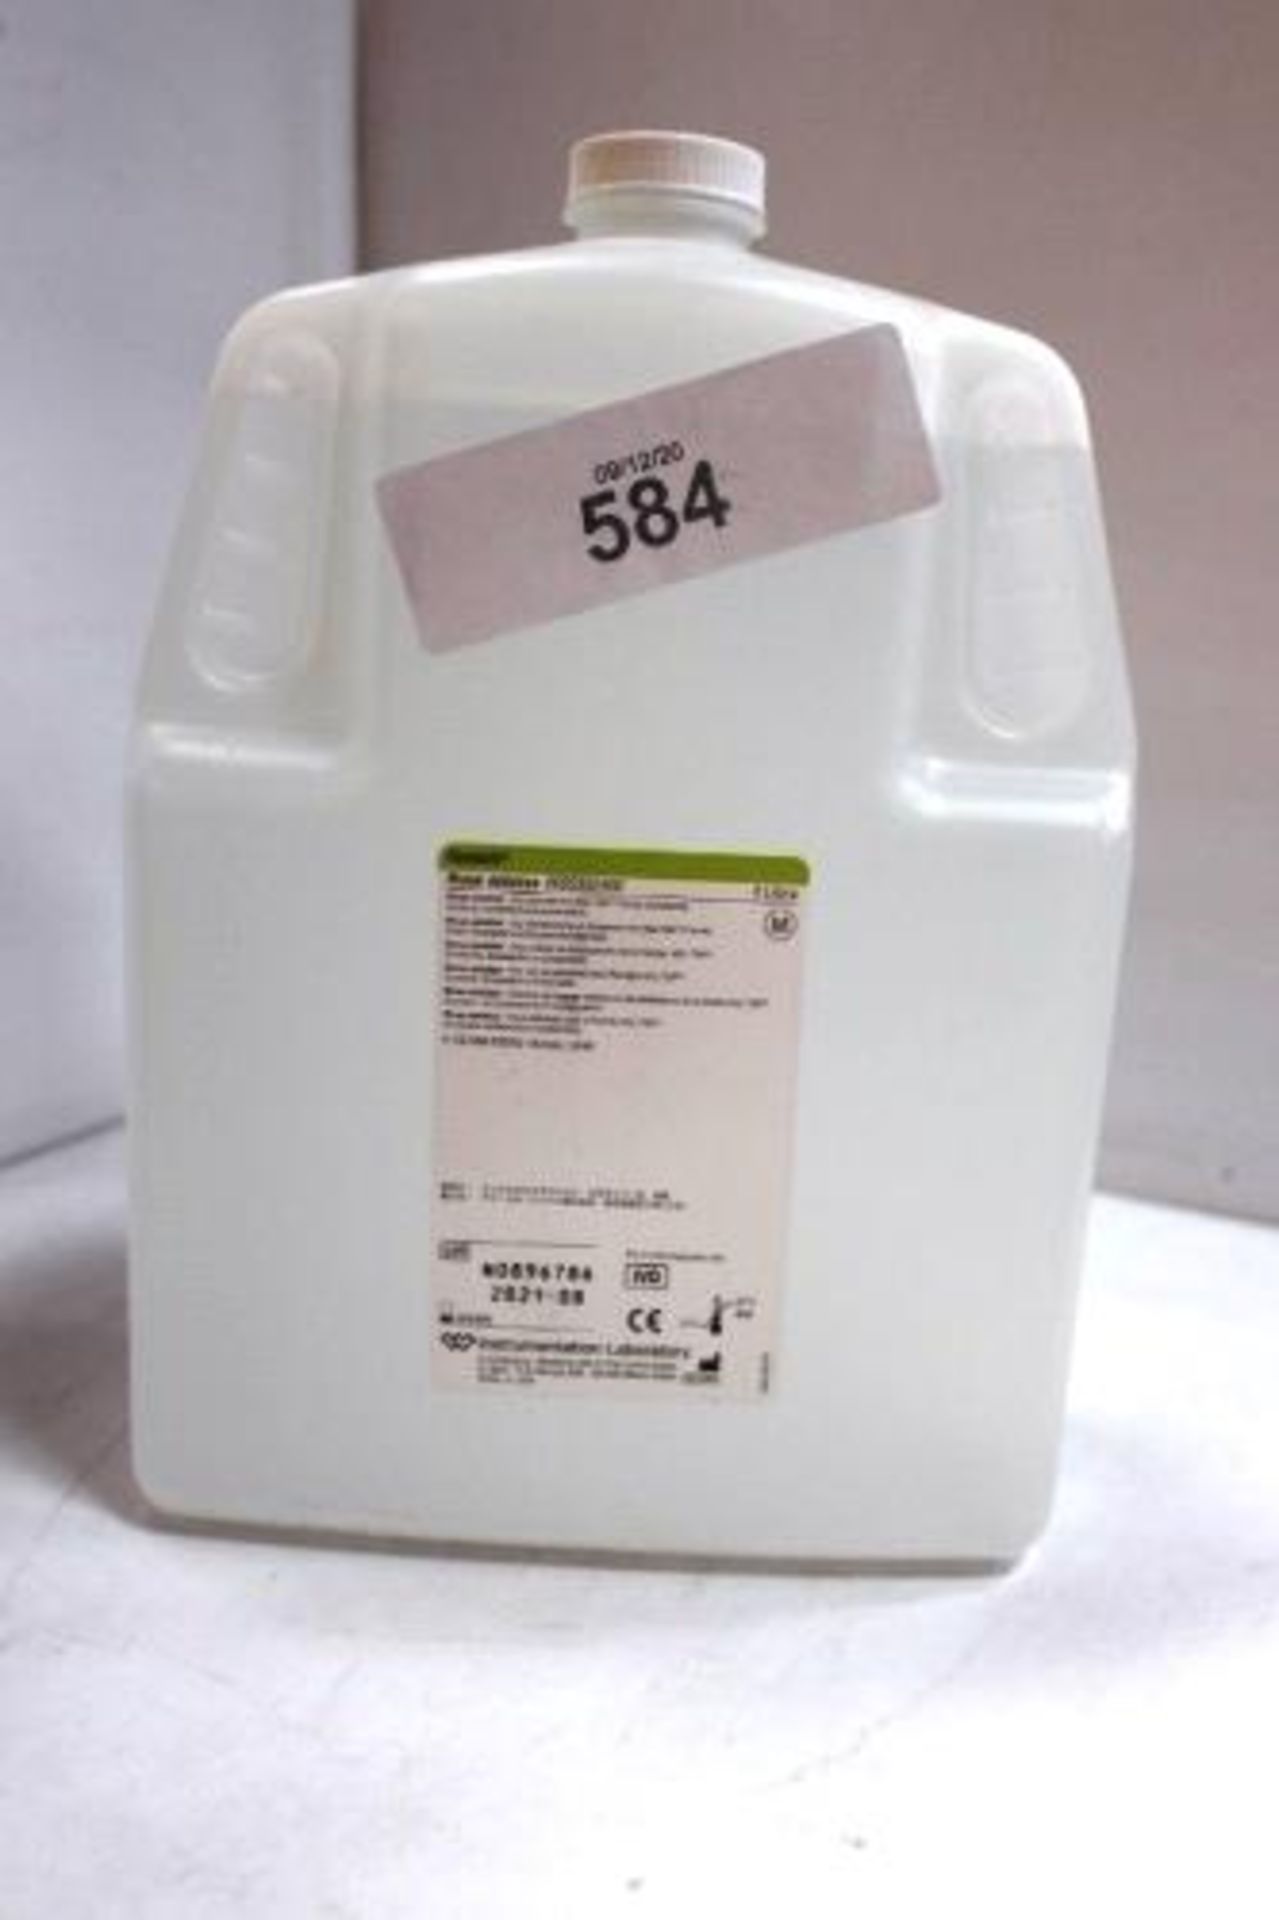 9 x 4ltrs bottles of Hemosil Rinse Solution, code 0020302400, expiry 08/21 - New (GS27) - Image 2 of 2